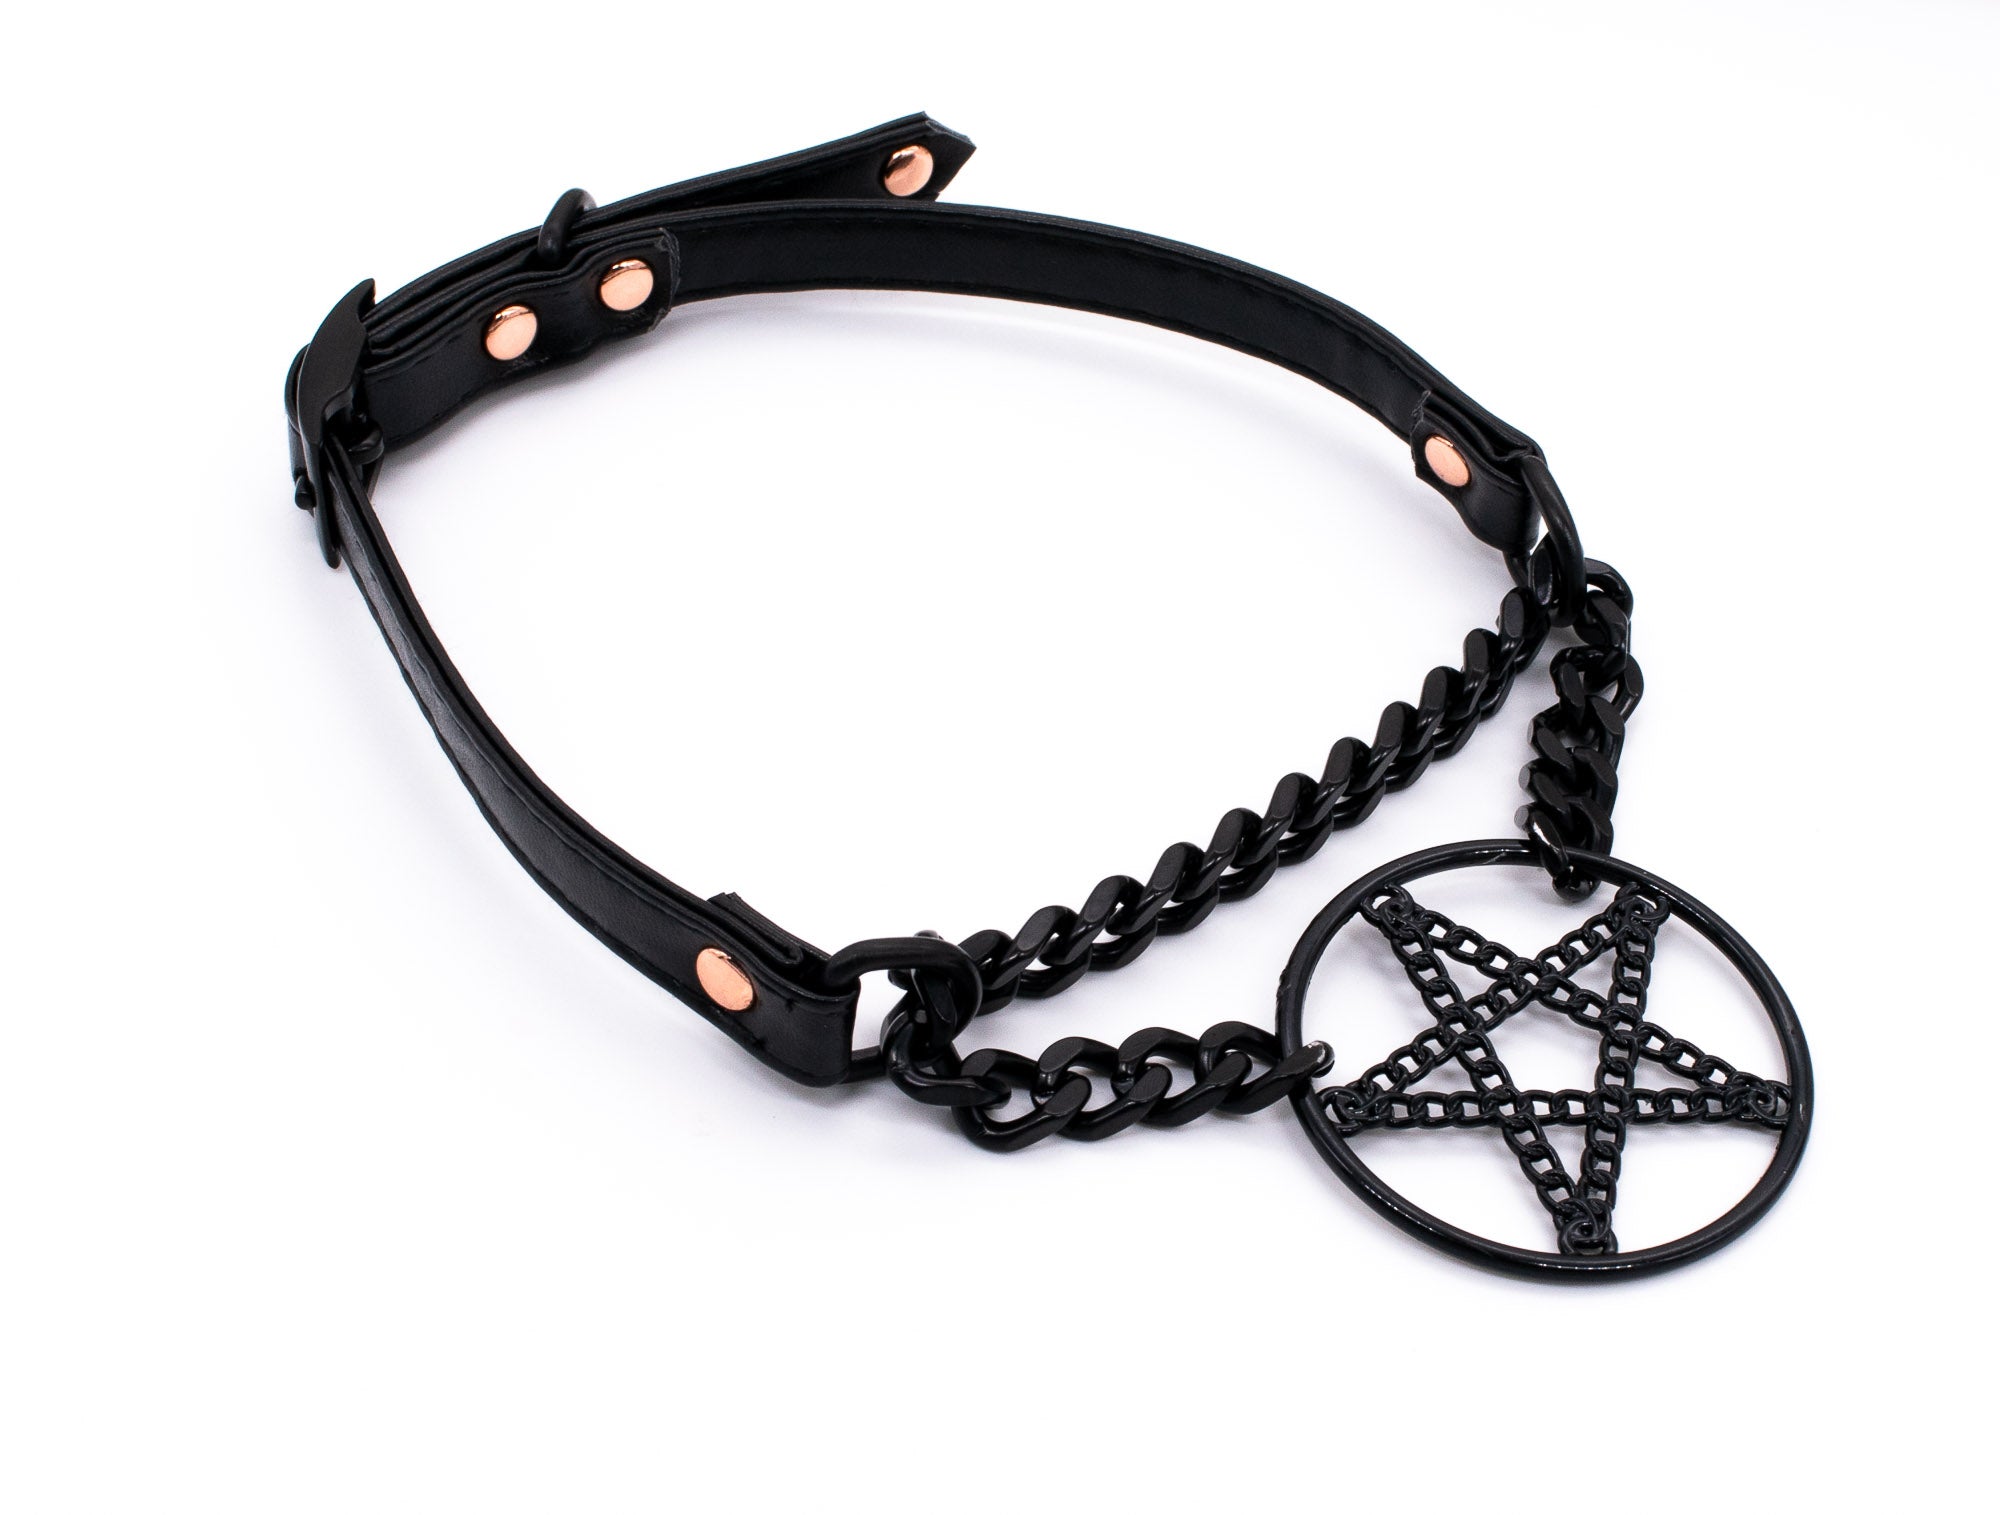 3/8" Black Pentacle Vegan Leather Martingale Collar in Rose Gold and Black